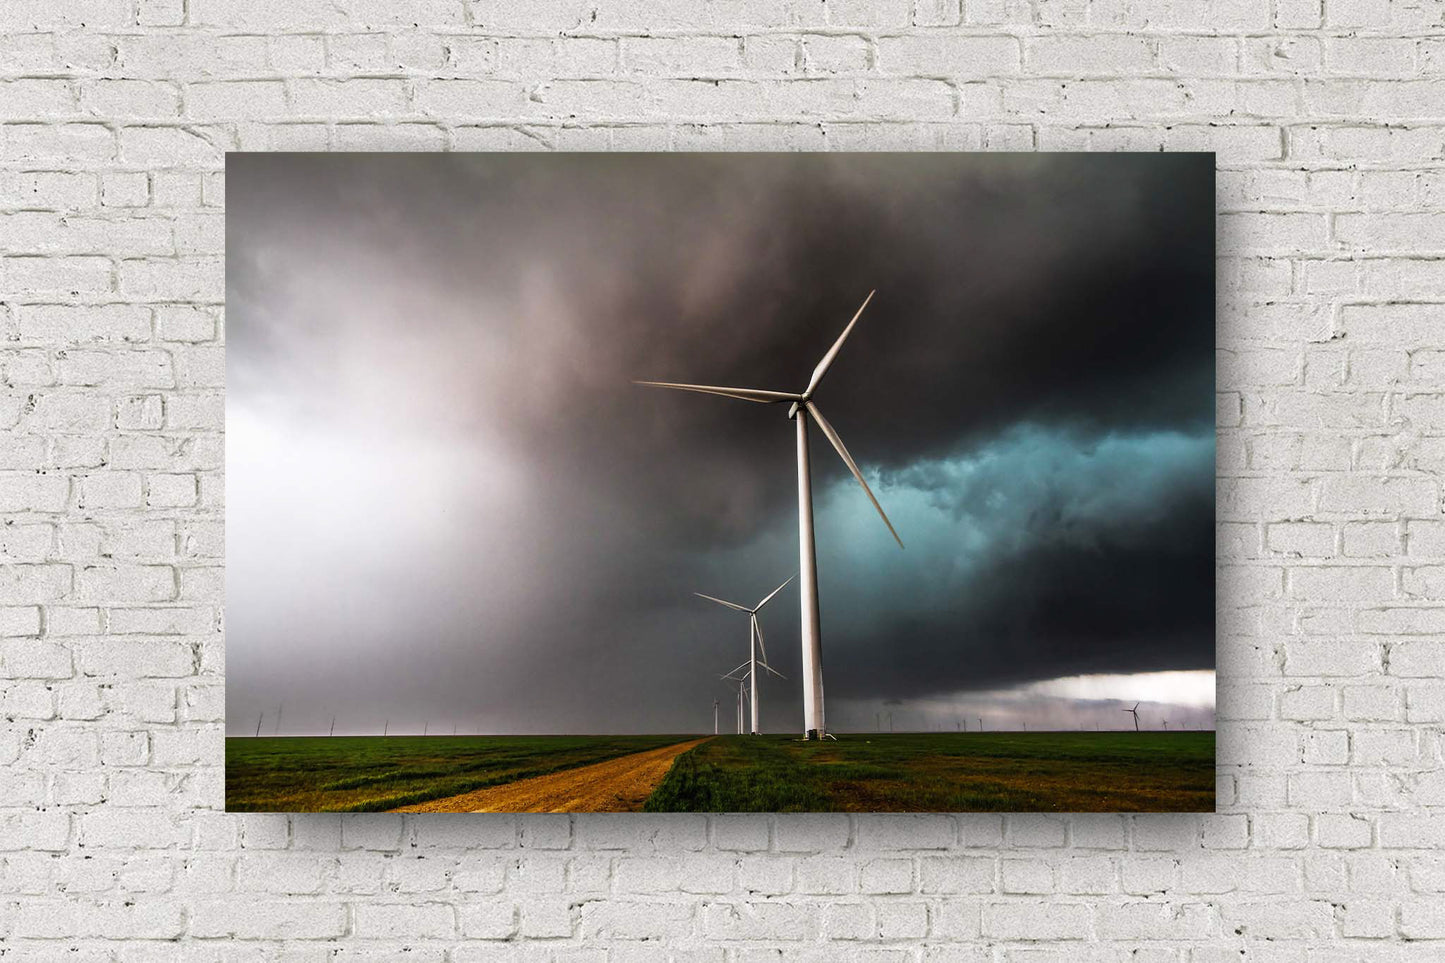 Great plains metal print of wind turbines churning through an intense storm as it moves through a wind farm on a stormy spring day in the Texas panhandle by Sean Ramsey of Southern Plains Photography.